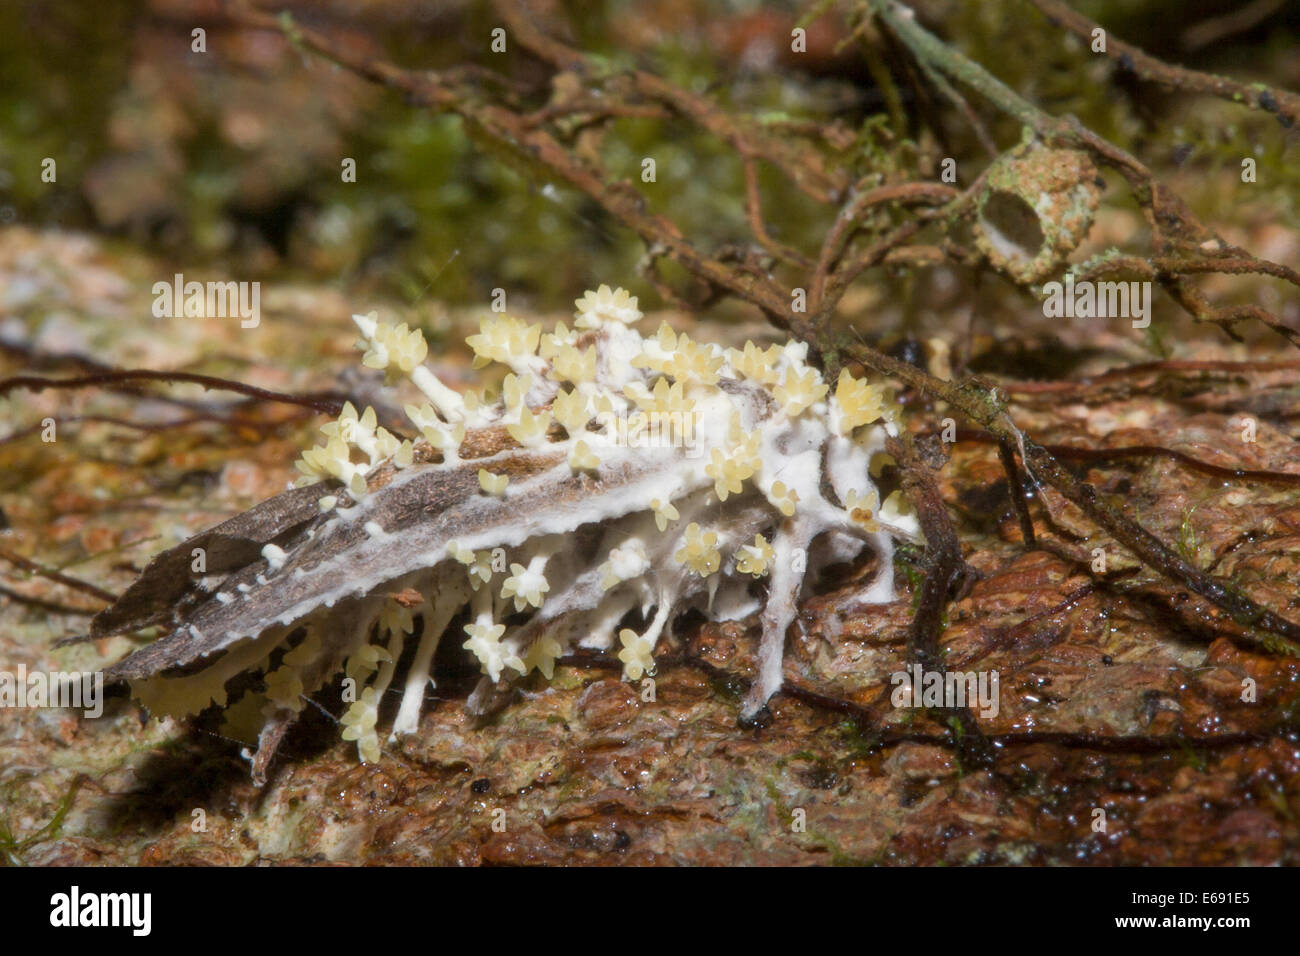 Moth infected with the devastating Cordyceps fungus.  Fruiting bodies of the fungus are clearly visible. Stock Photo